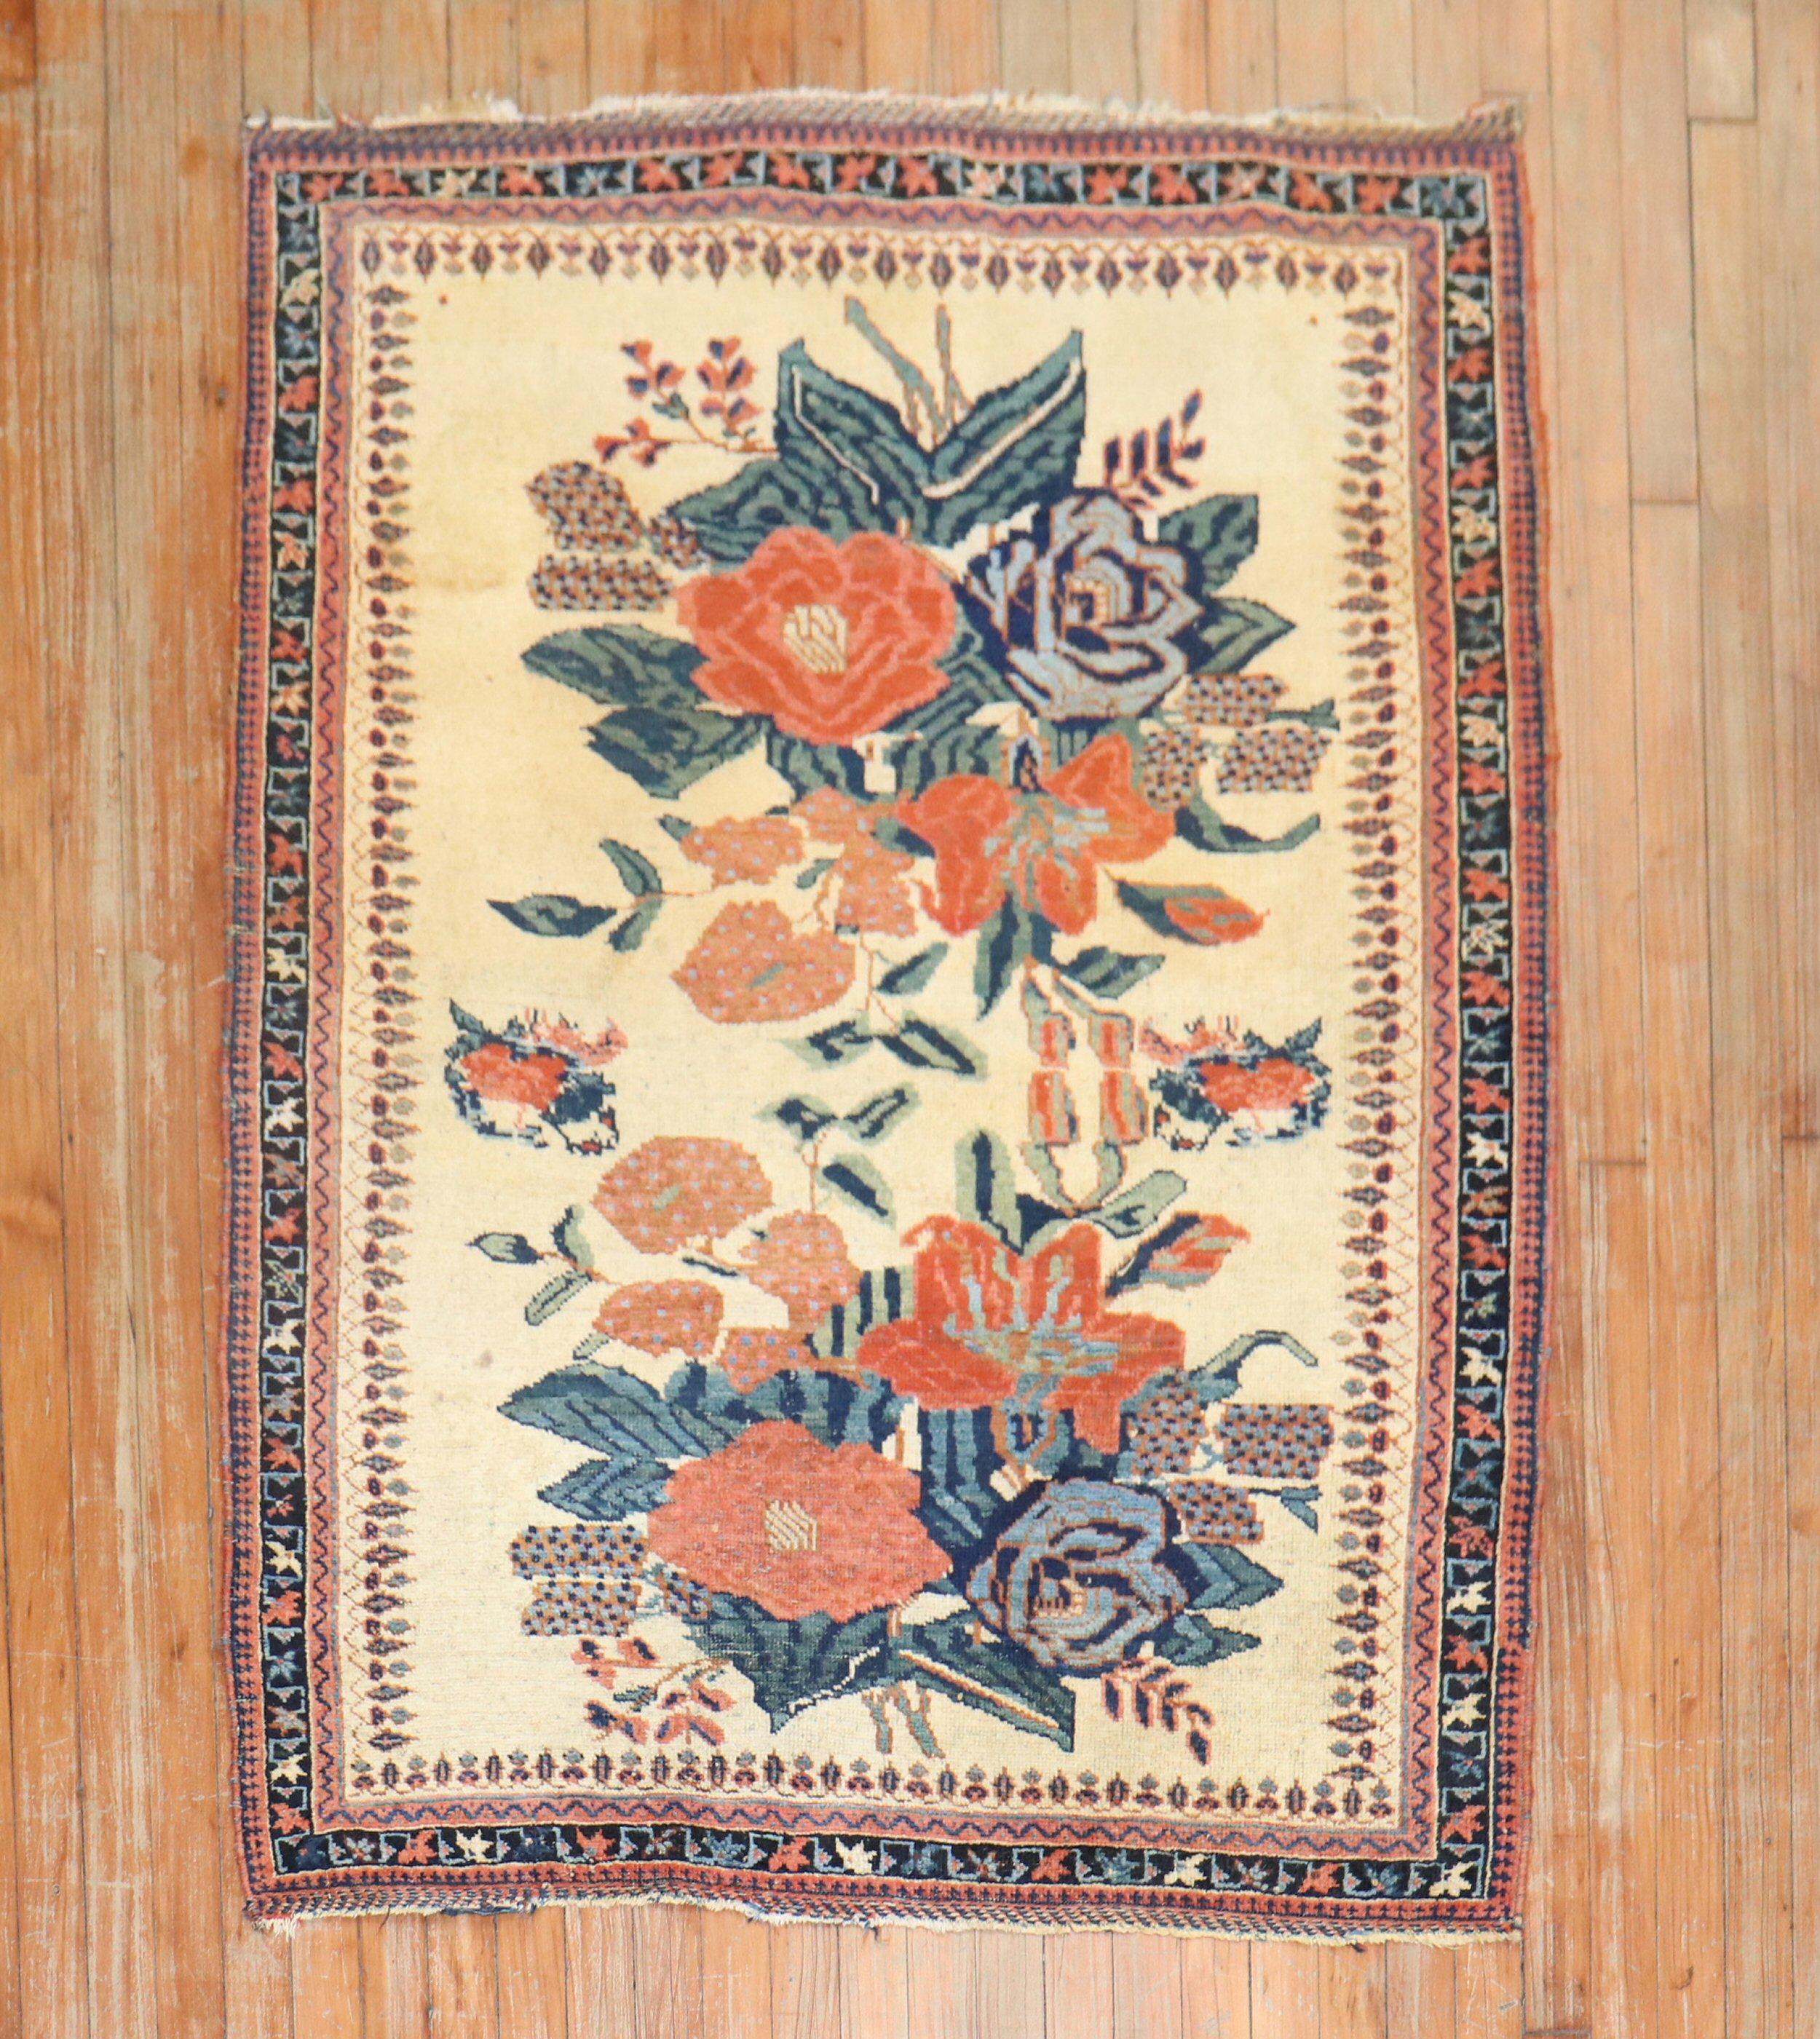 An early 20th century Persian Afshar Tribal rug with a large floral design on an ivory field

Measure: 3'9'' x 4'10''.